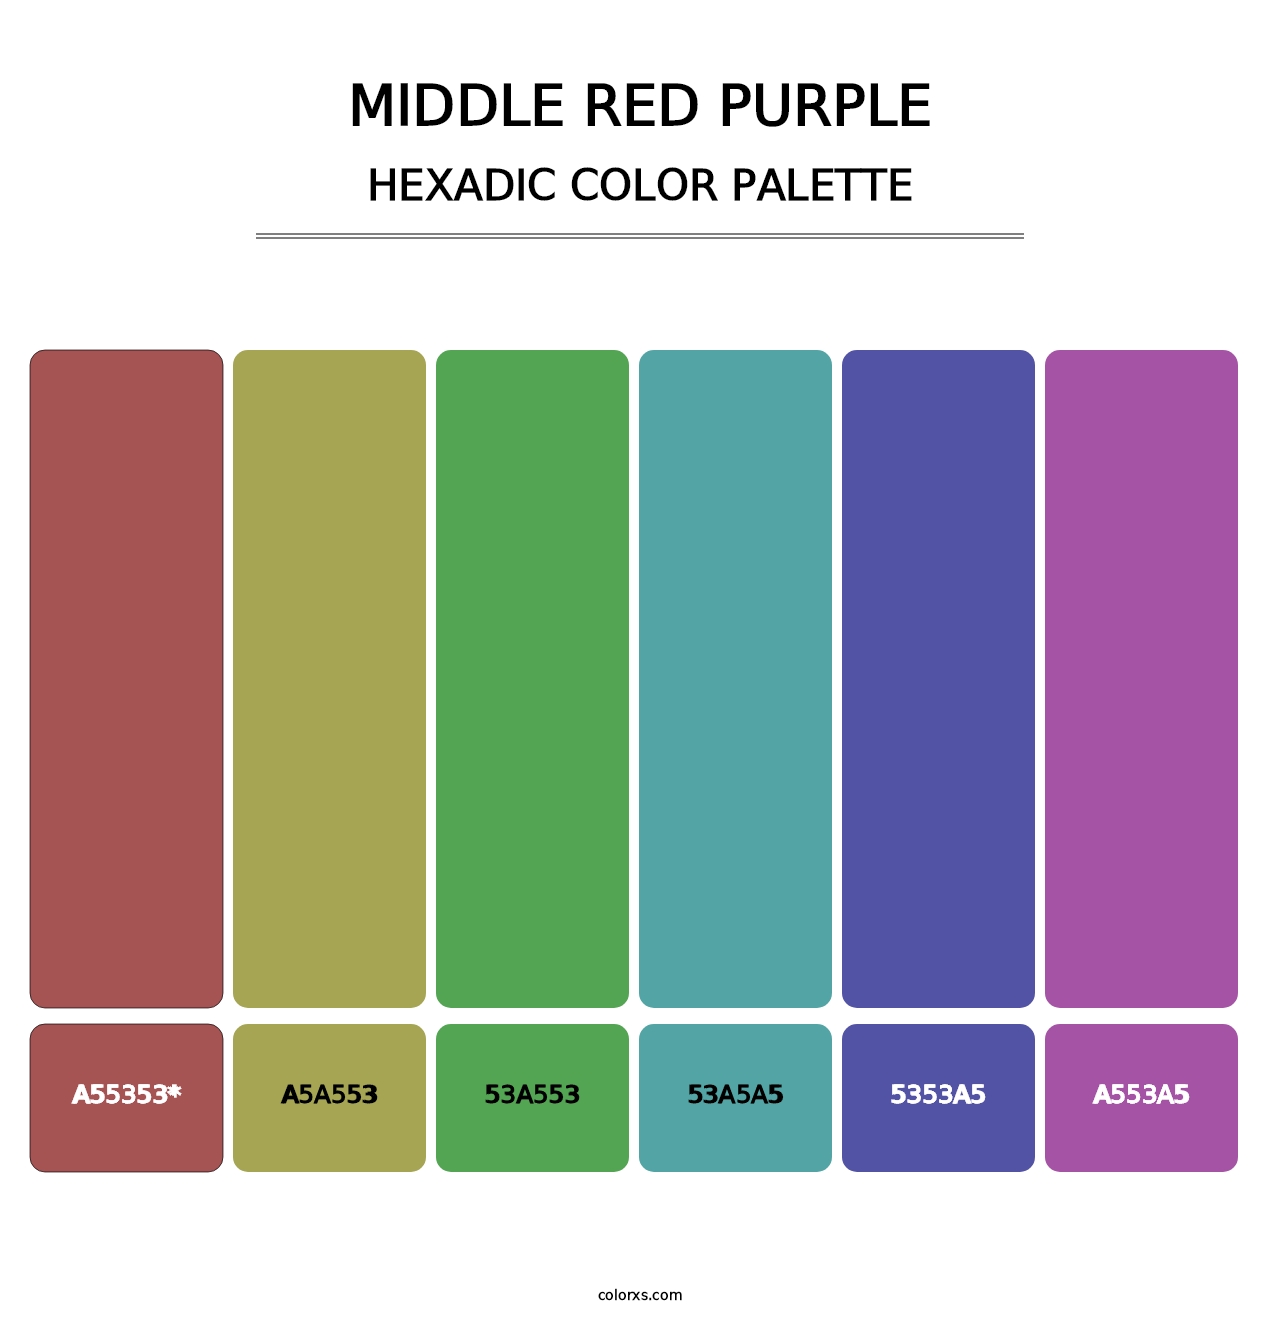 Middle Red Purple - Hexadic Color Palette